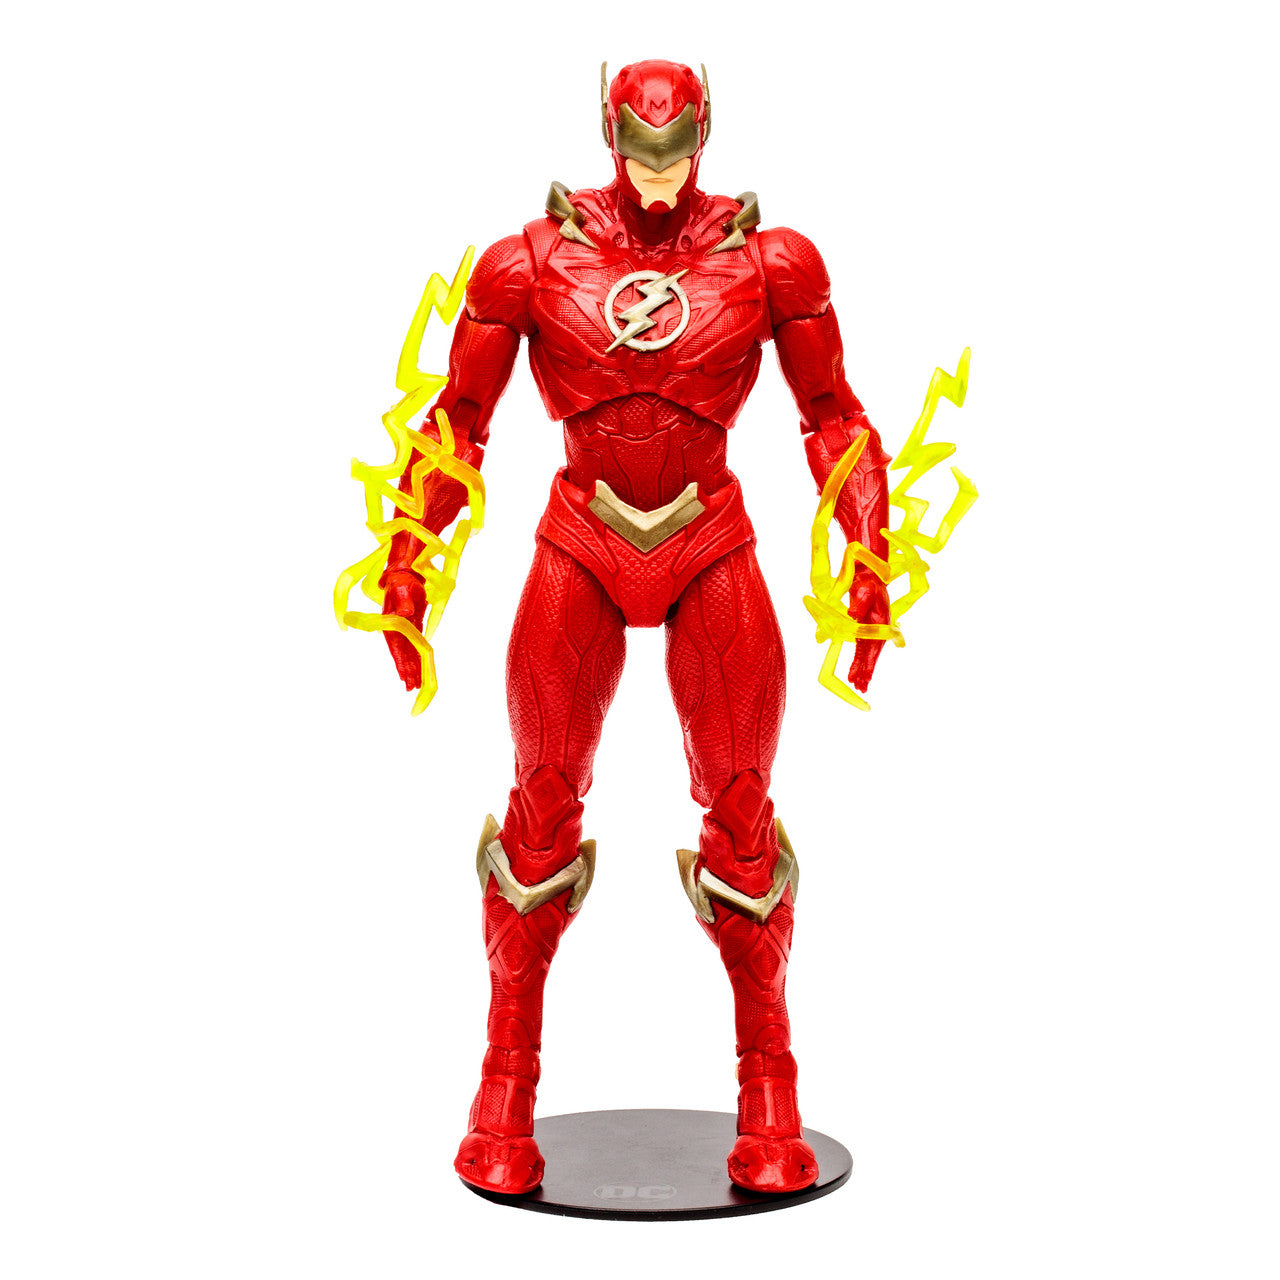 The Flash Barry Allen w/ Comic (Page Punchers Series) 7" Figure by Mcfarlane Toys -McFarlane Toys - India - www.superherotoystore.com